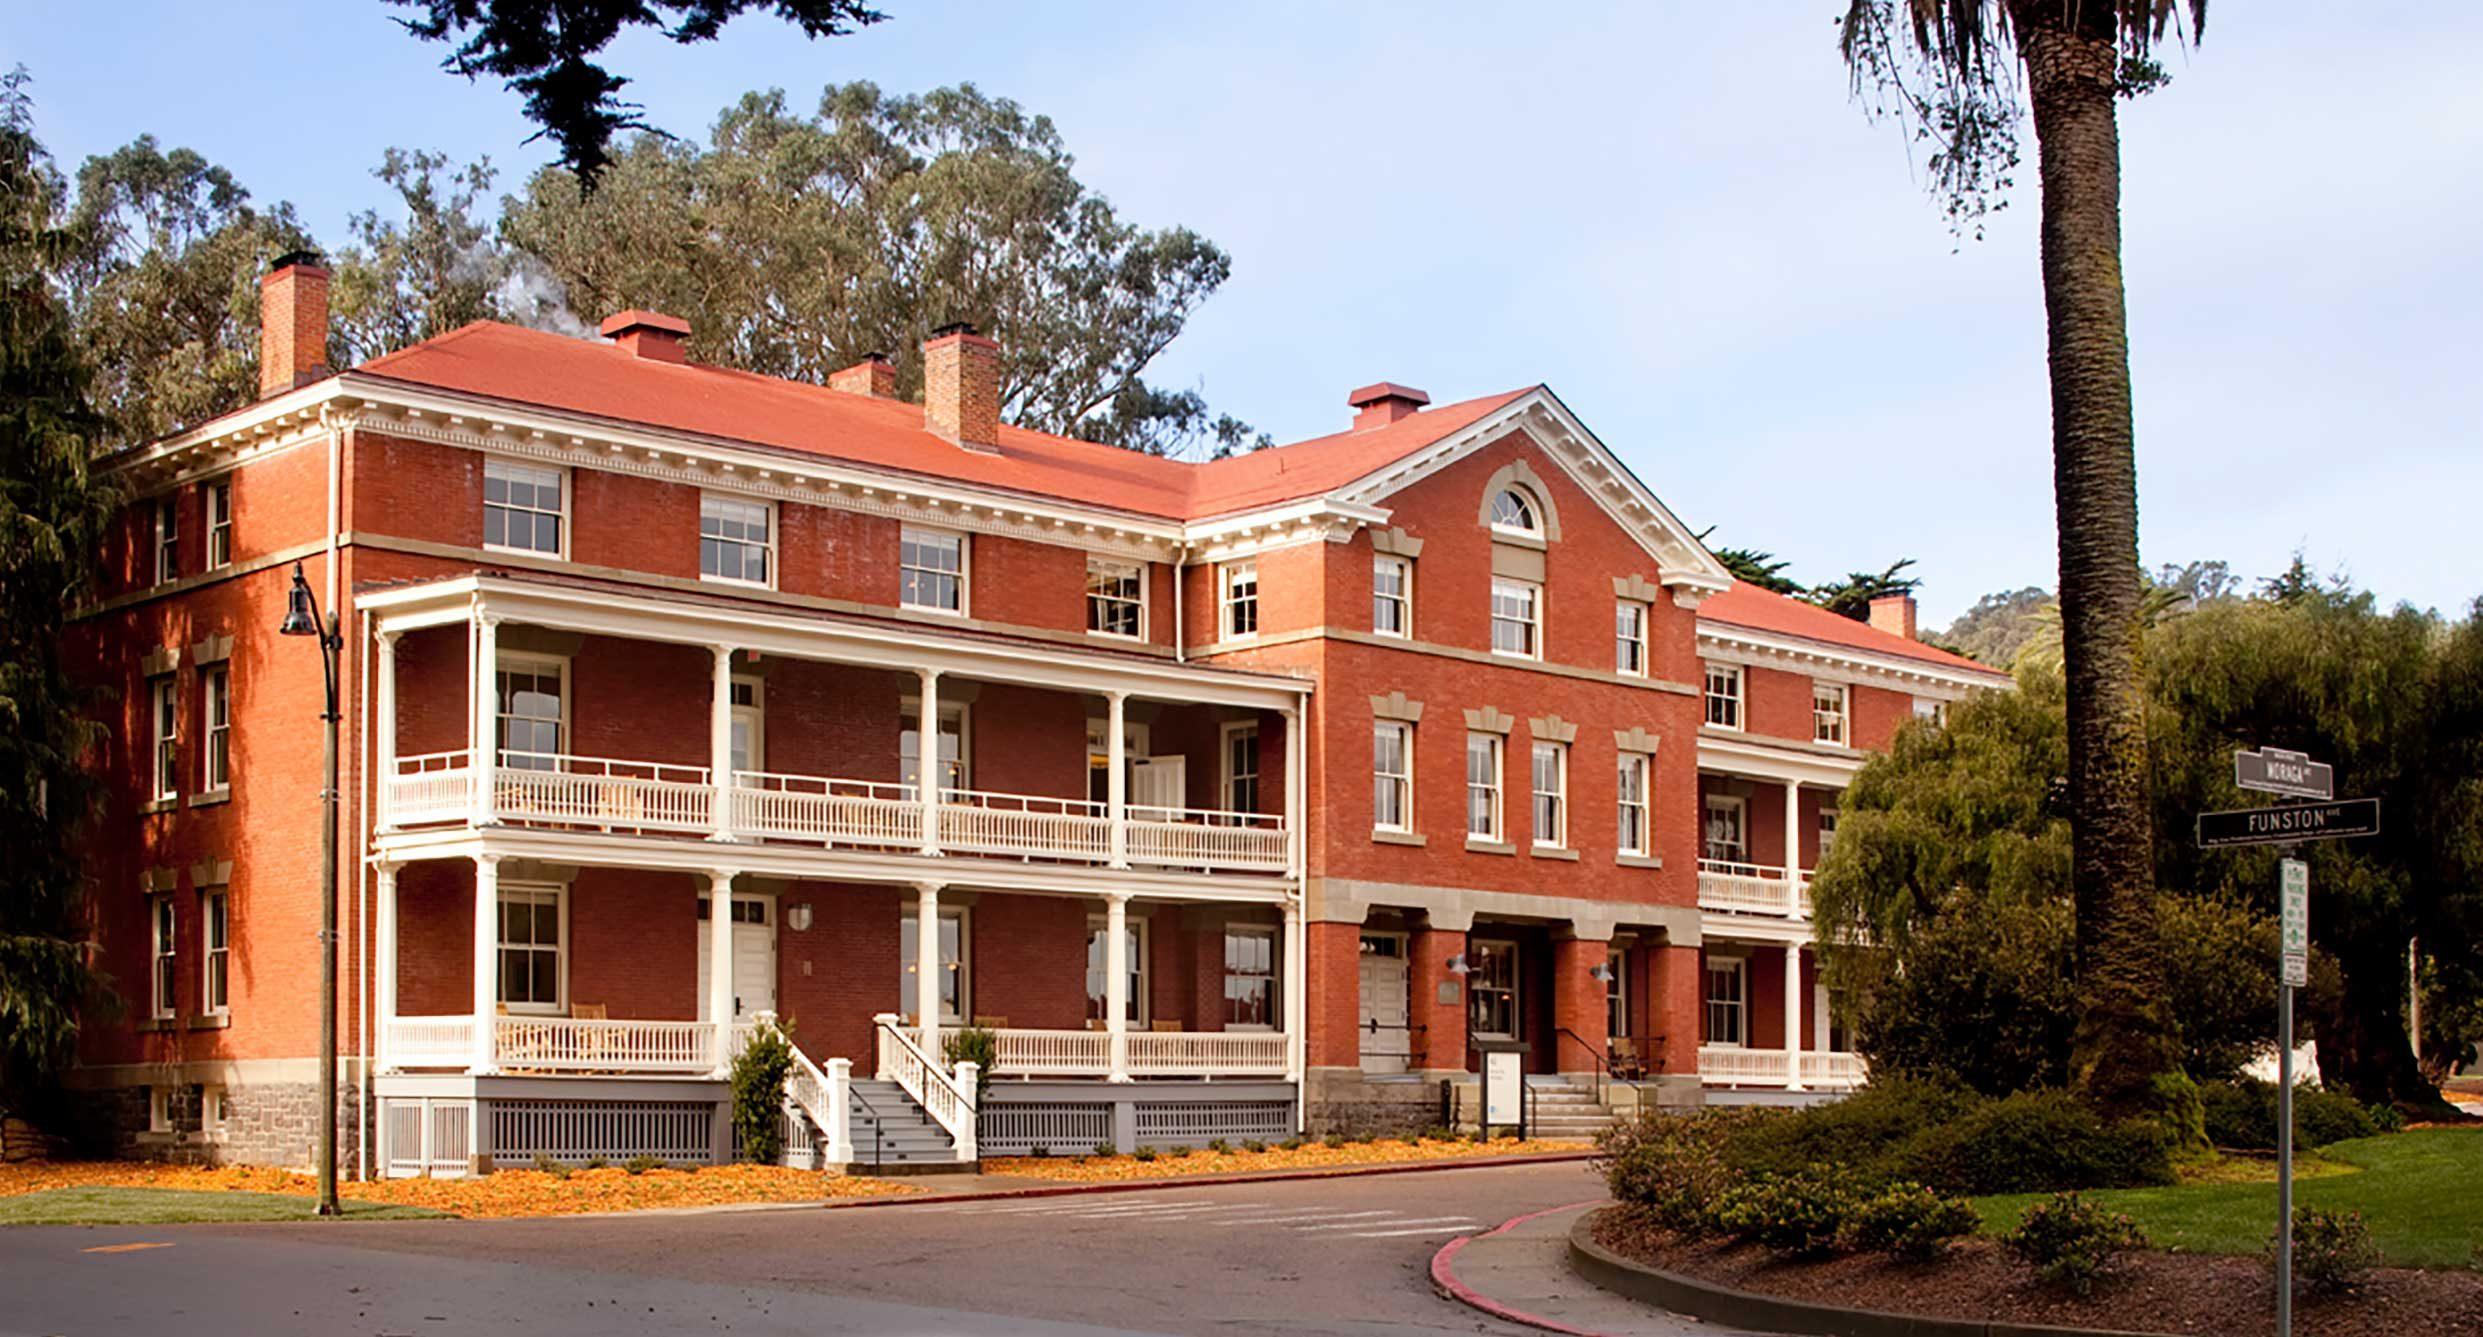 Exterior of the Inn at the Presidio. Photo by Paul Dyer.